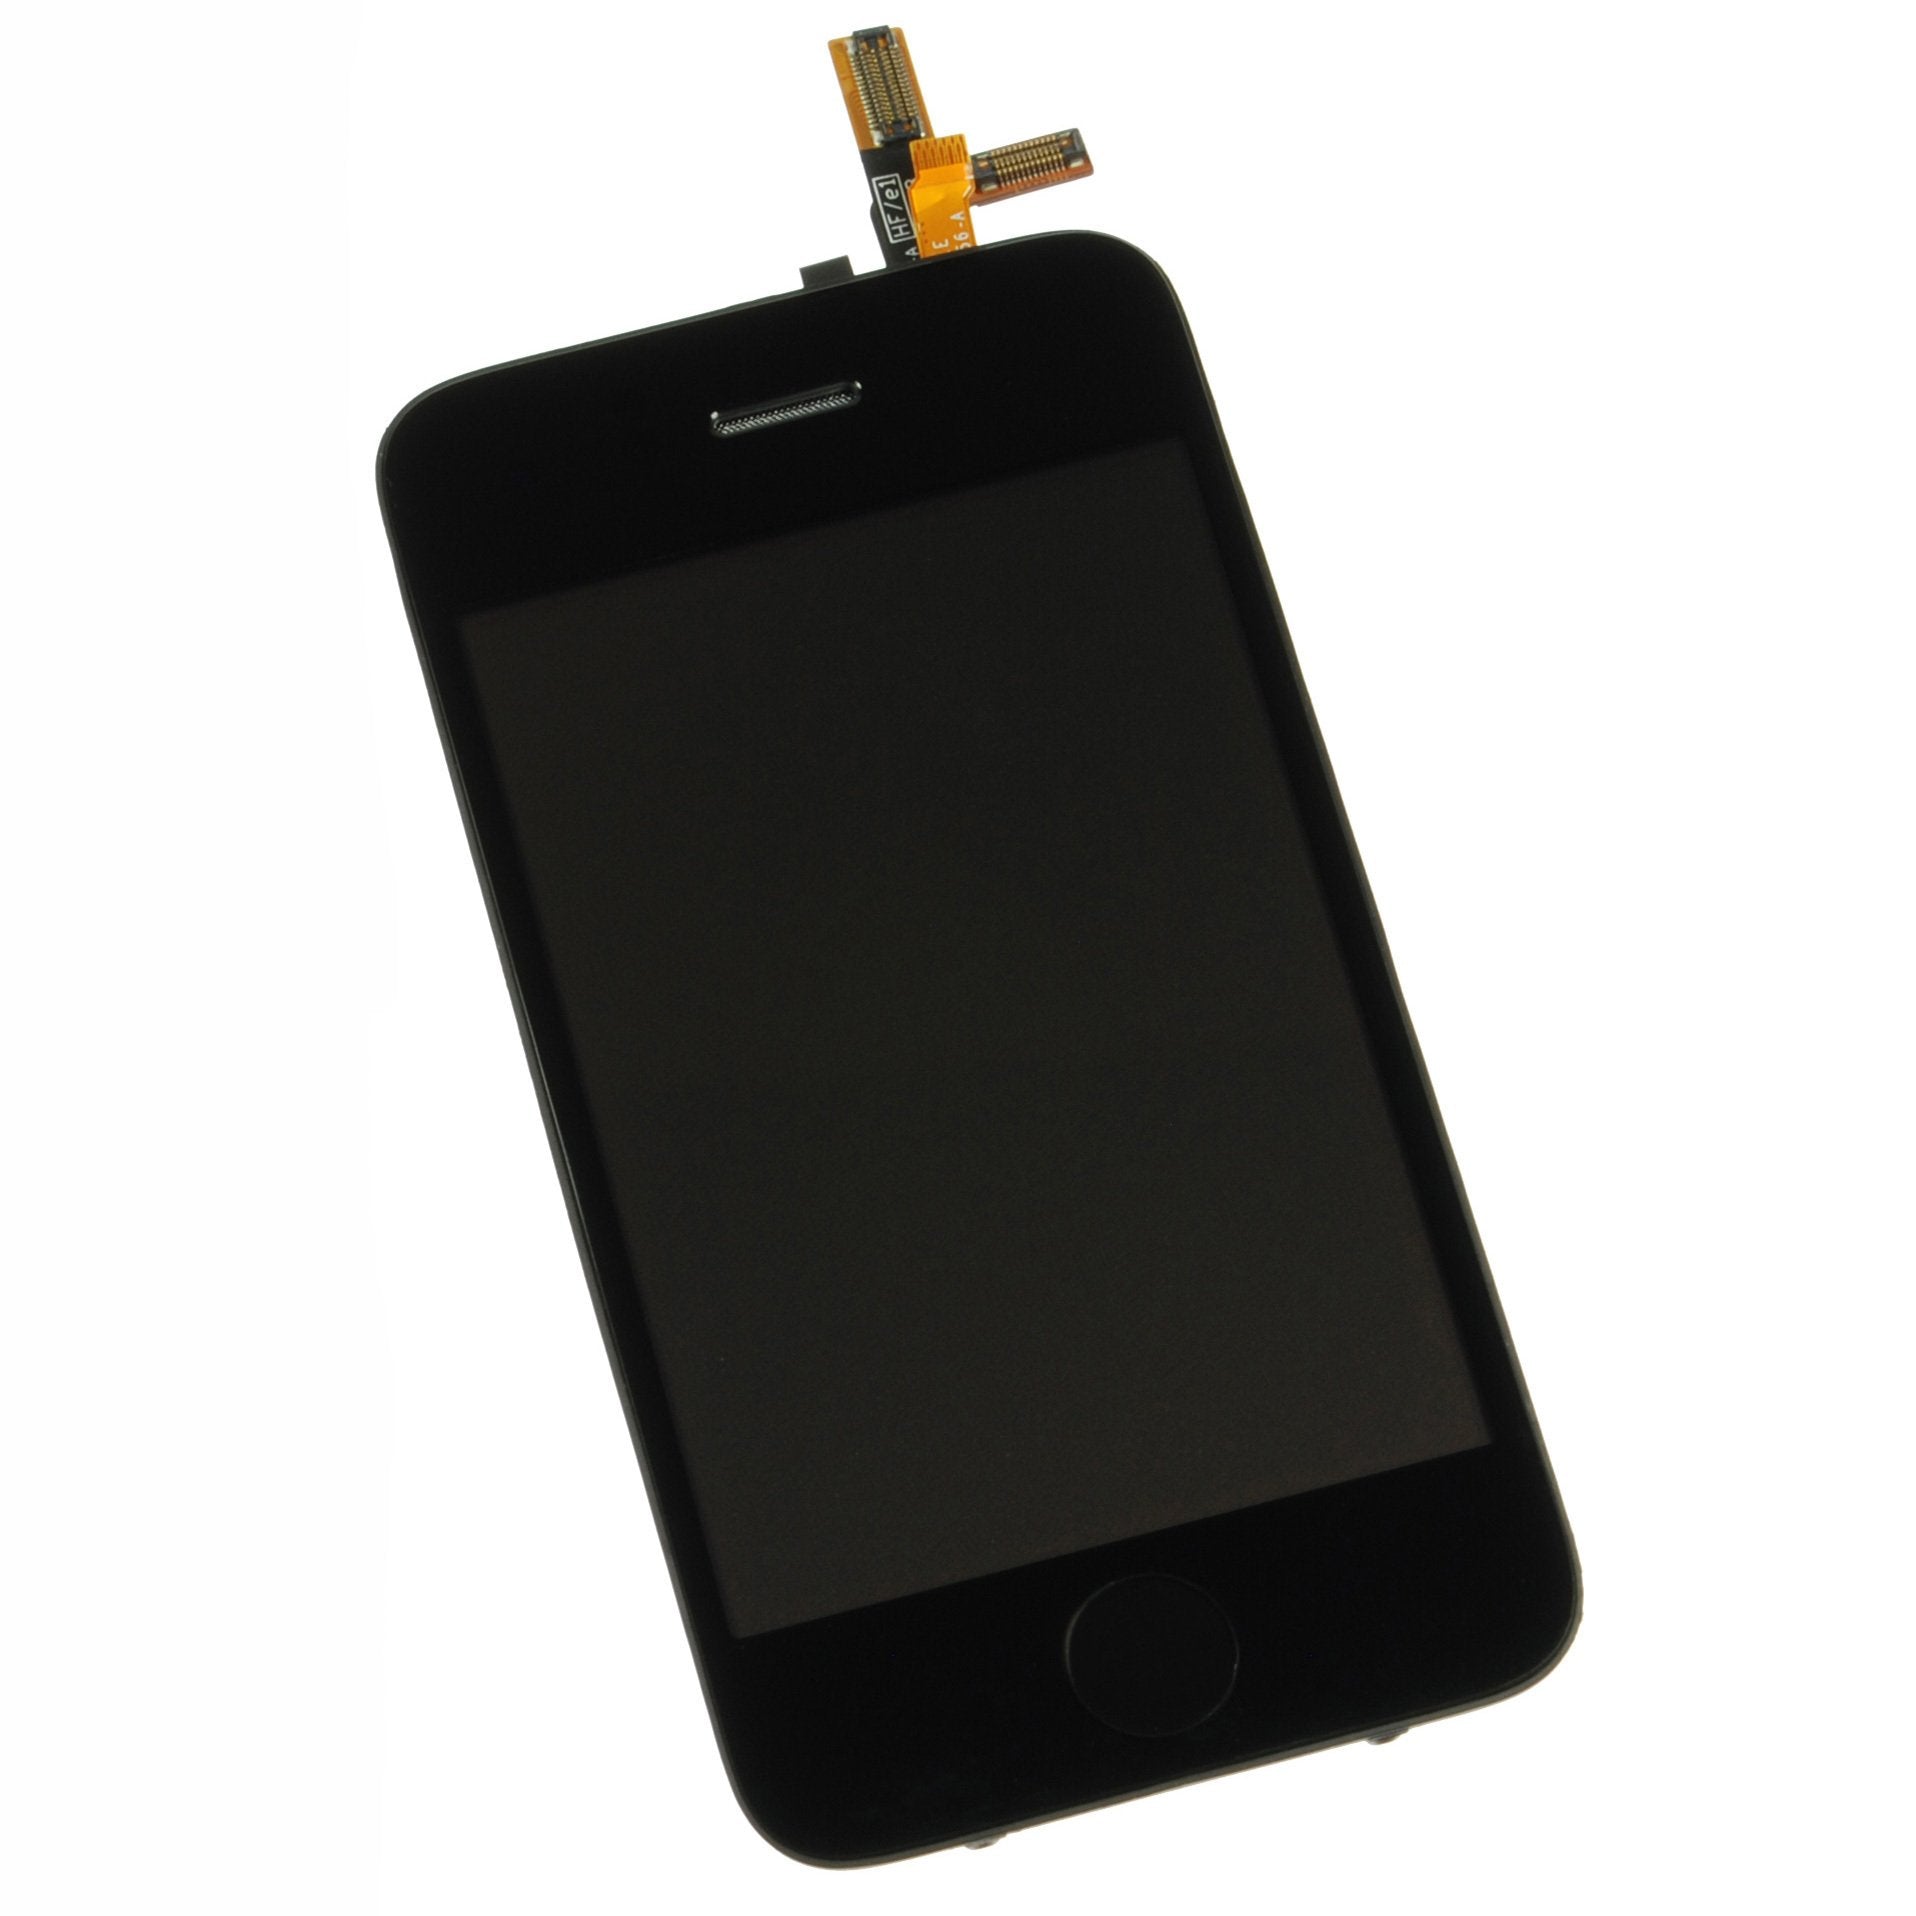 iPhone 3G Display Assembly